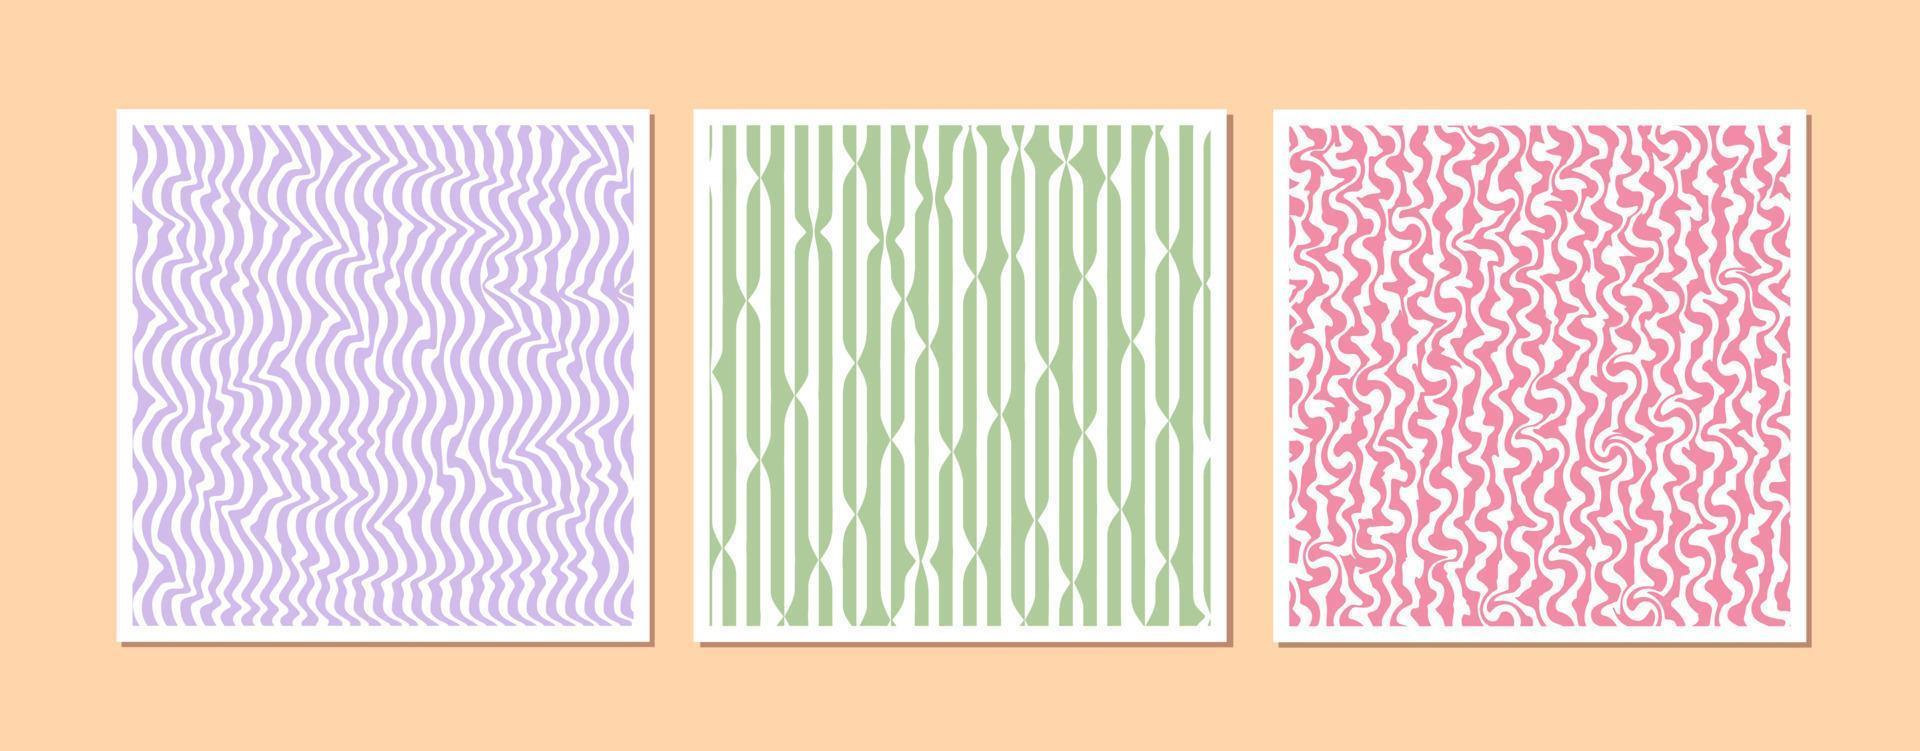 Set of isolated 1970s Retro pattern groovy trippy. Wavy pattern, optical illusion. Abstract psychedelic background. Poster with 70s retro style. Hippie Aesthetic. Y2k style. Vector Illustration